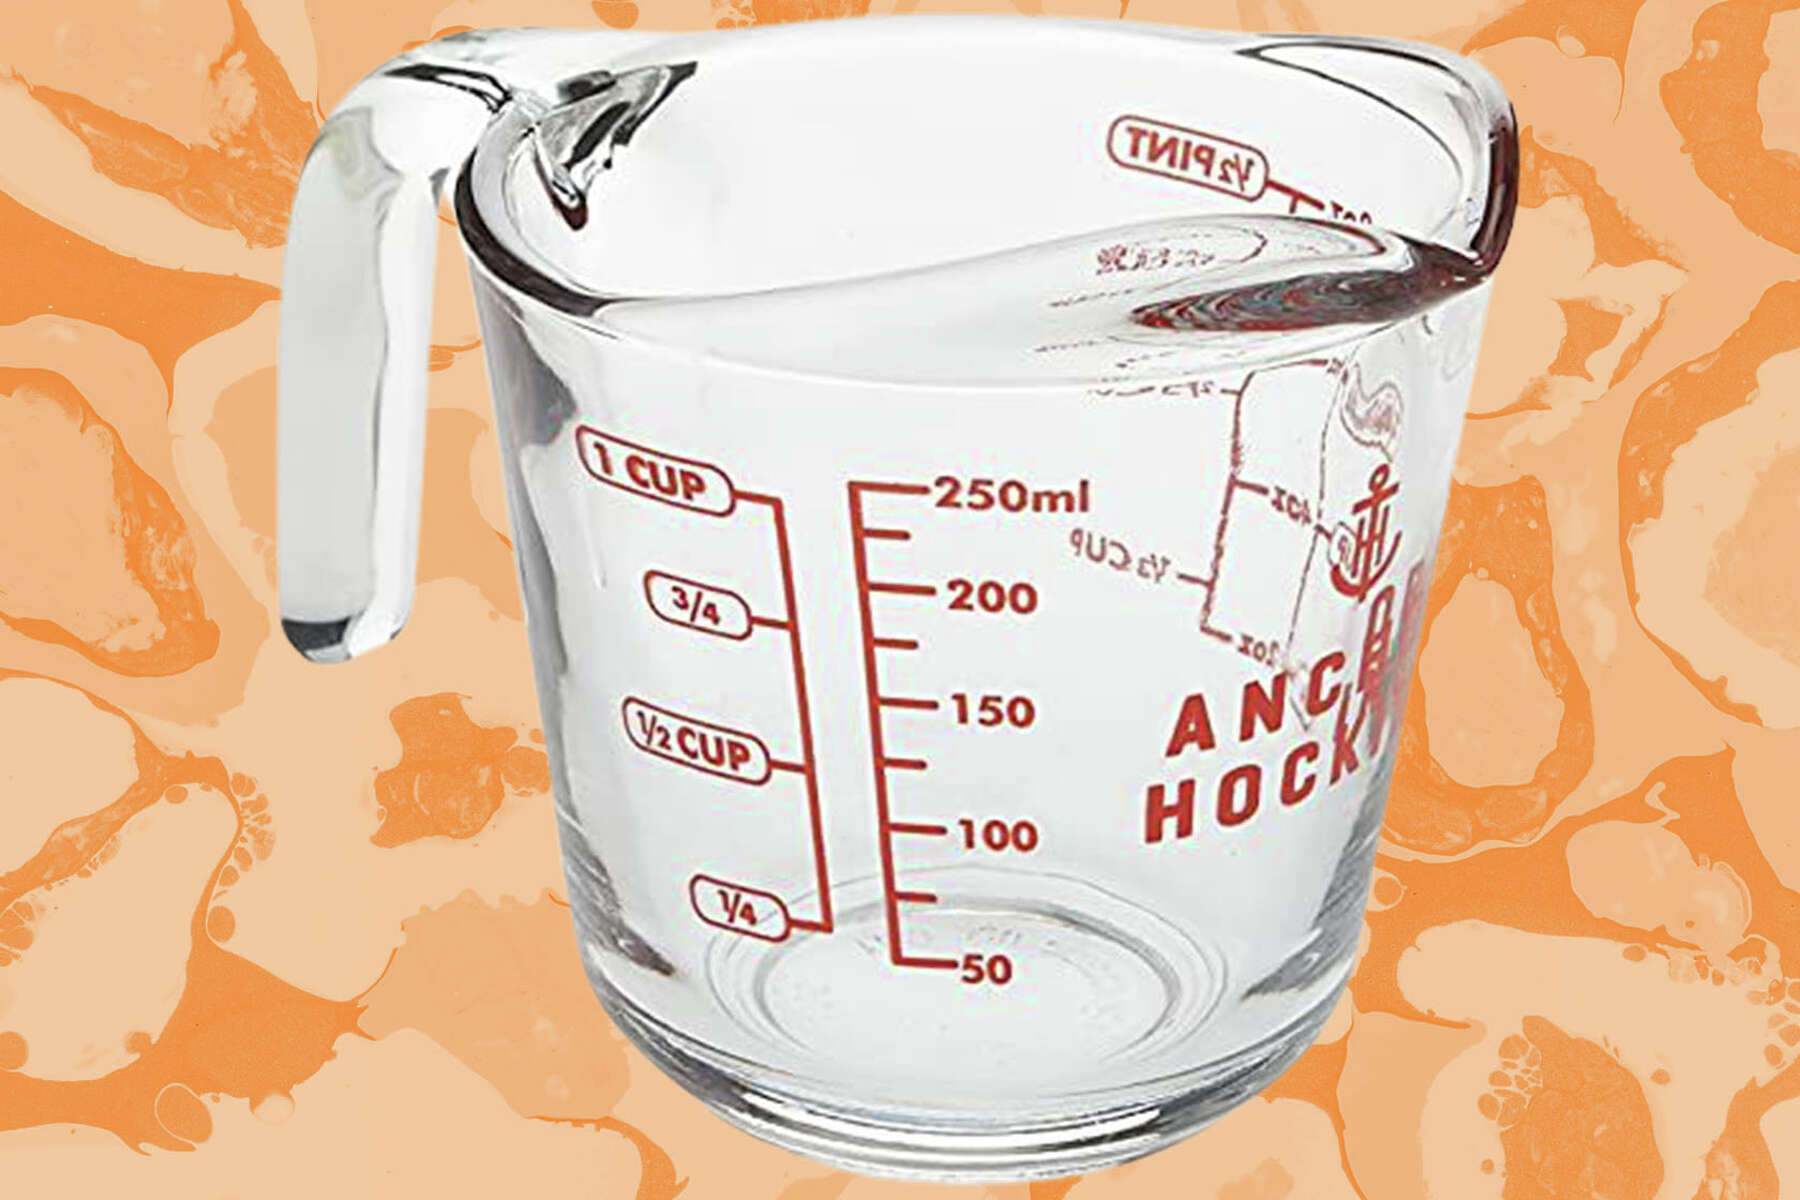 Anchor Hocking Glass Measuring Cup with Lid (8 oz.)